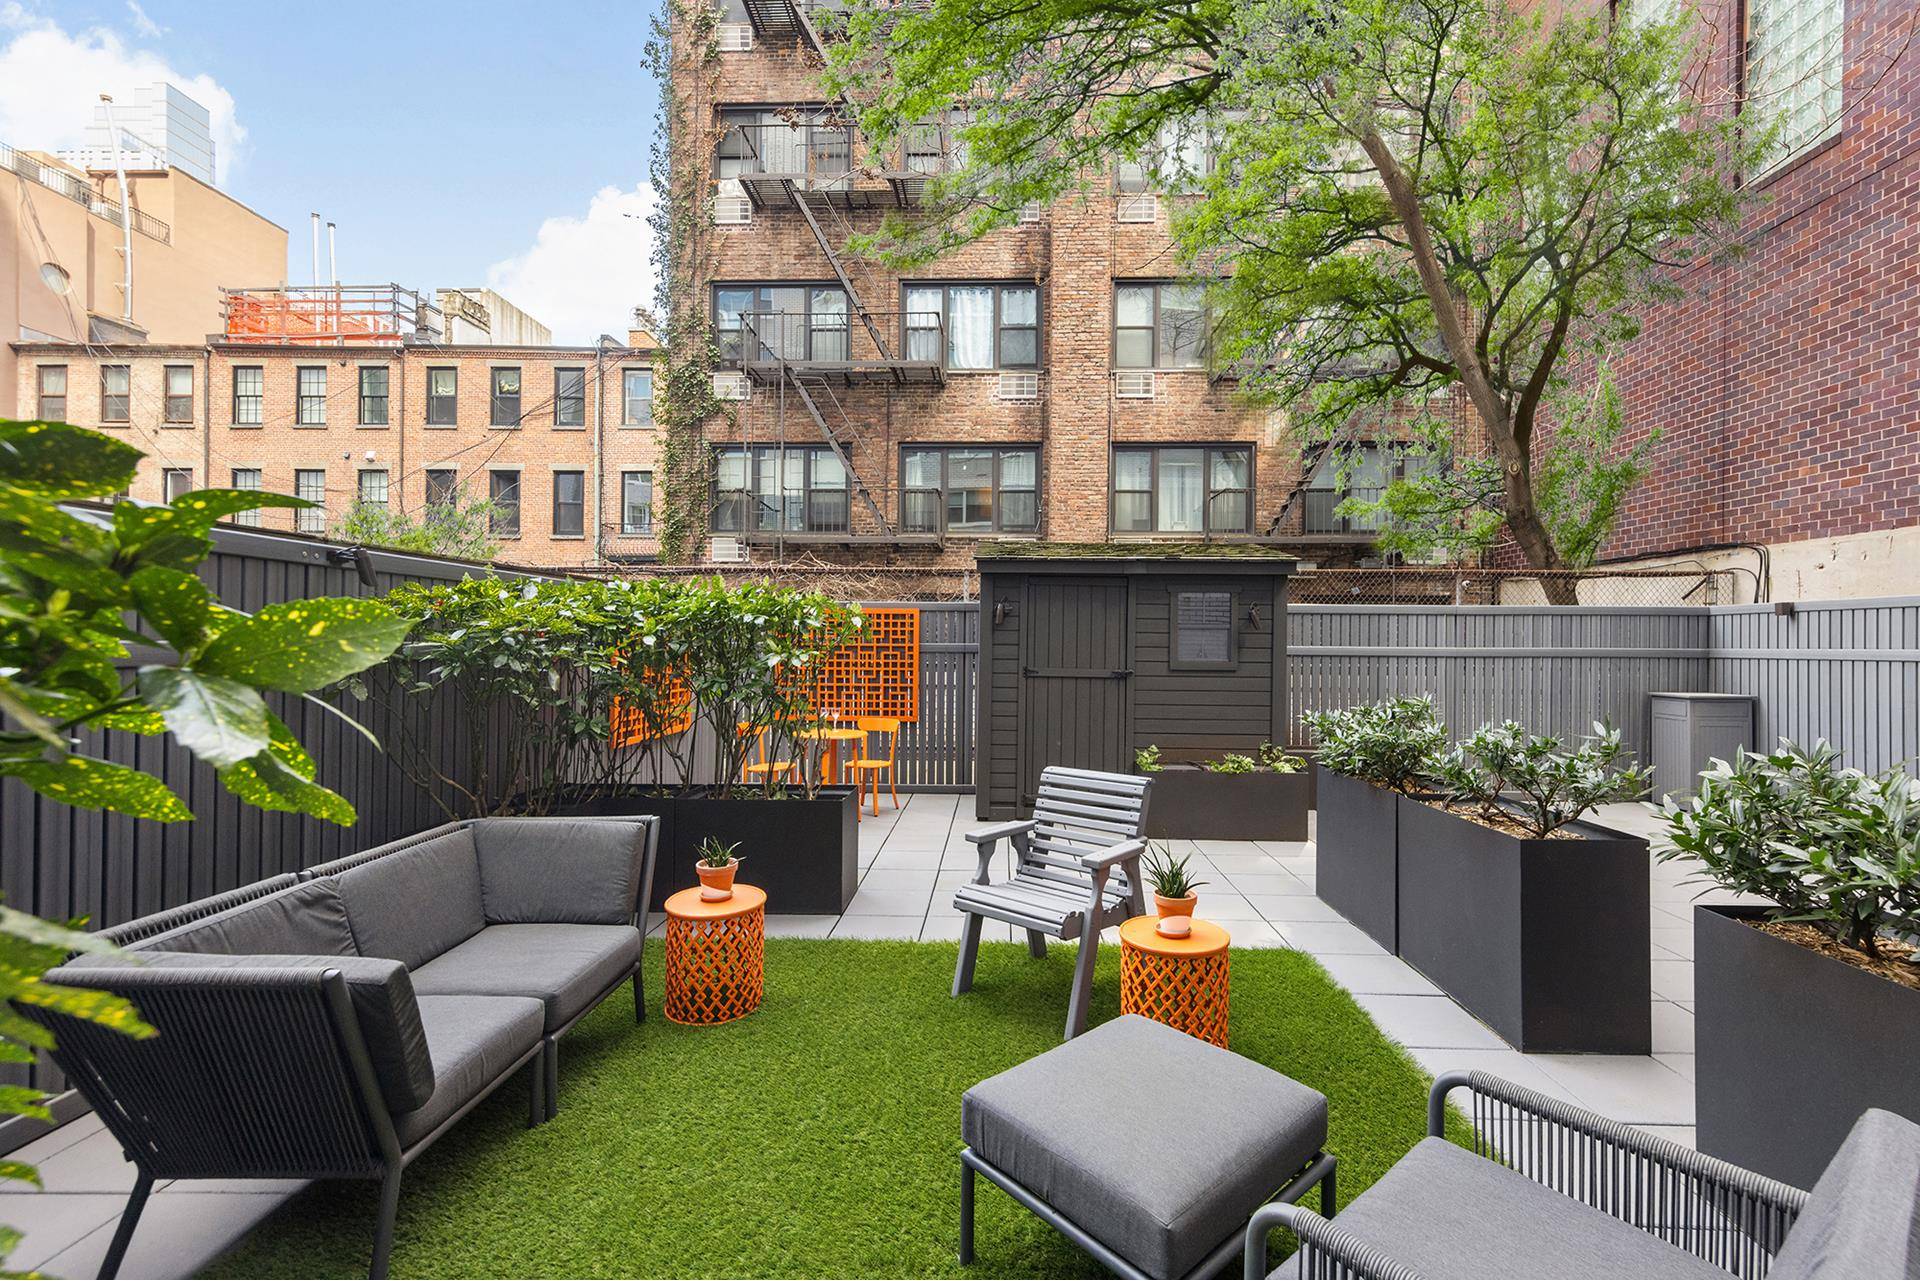 Welcome to your urban oasis at The Caravelle, nestled in the heart of the Upper East Side !